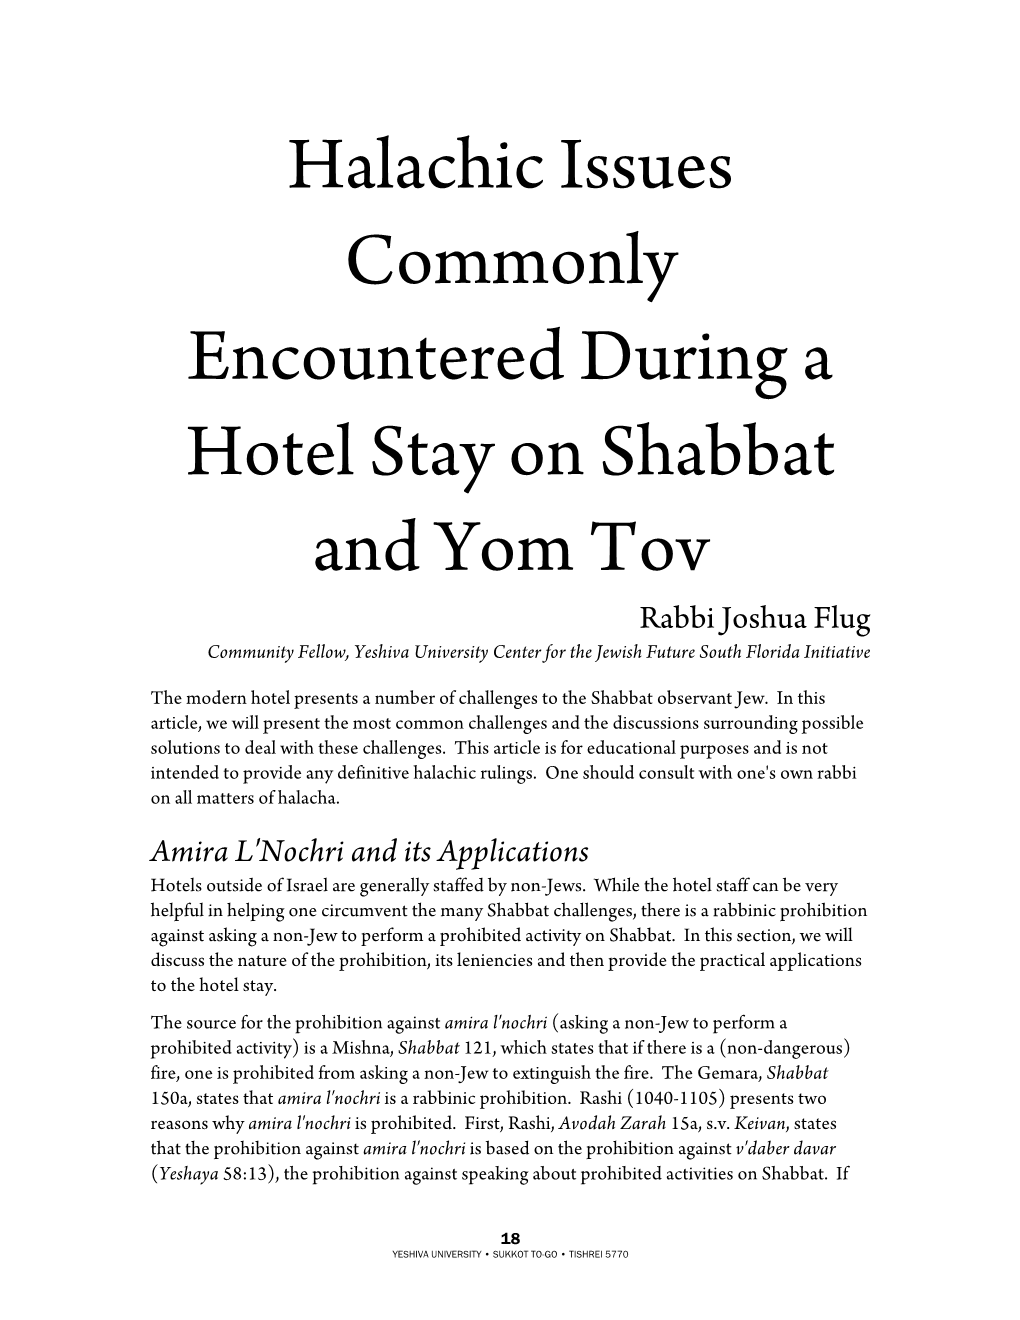 Halachic Issues Commonly Encountered During a Hotel Stay